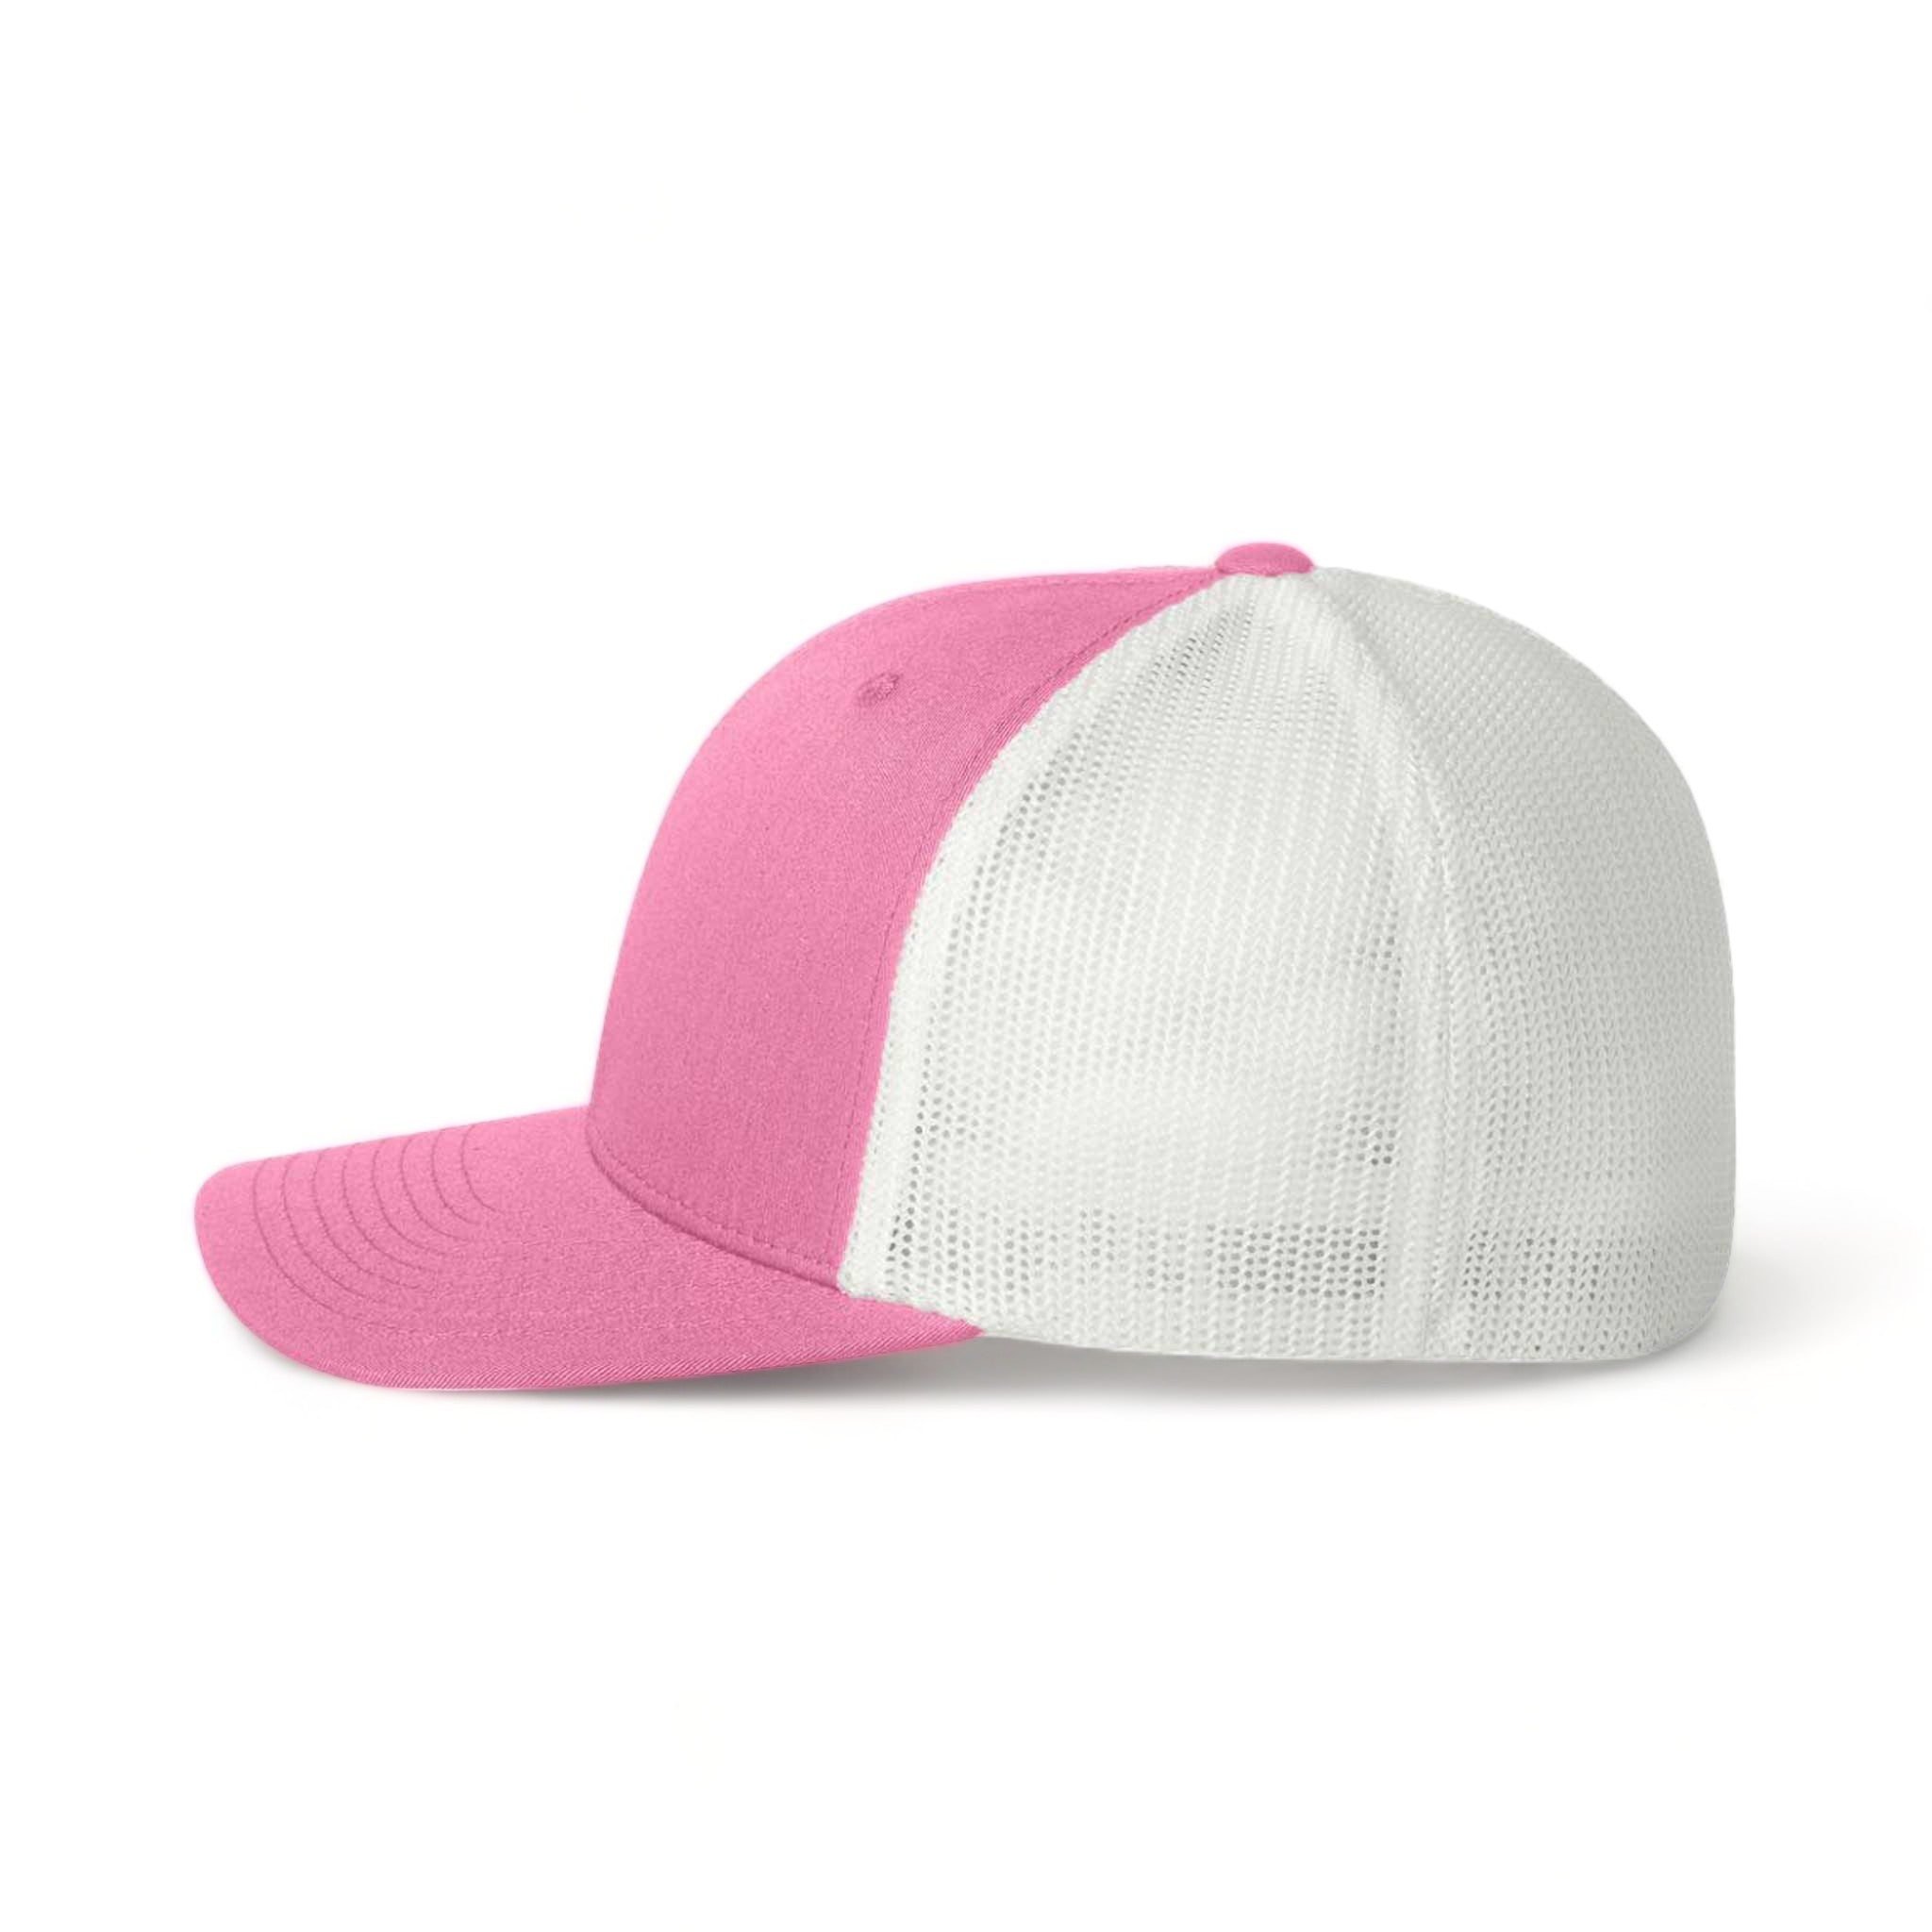 Side view of Flexfit 6511 custom hat in pink and white